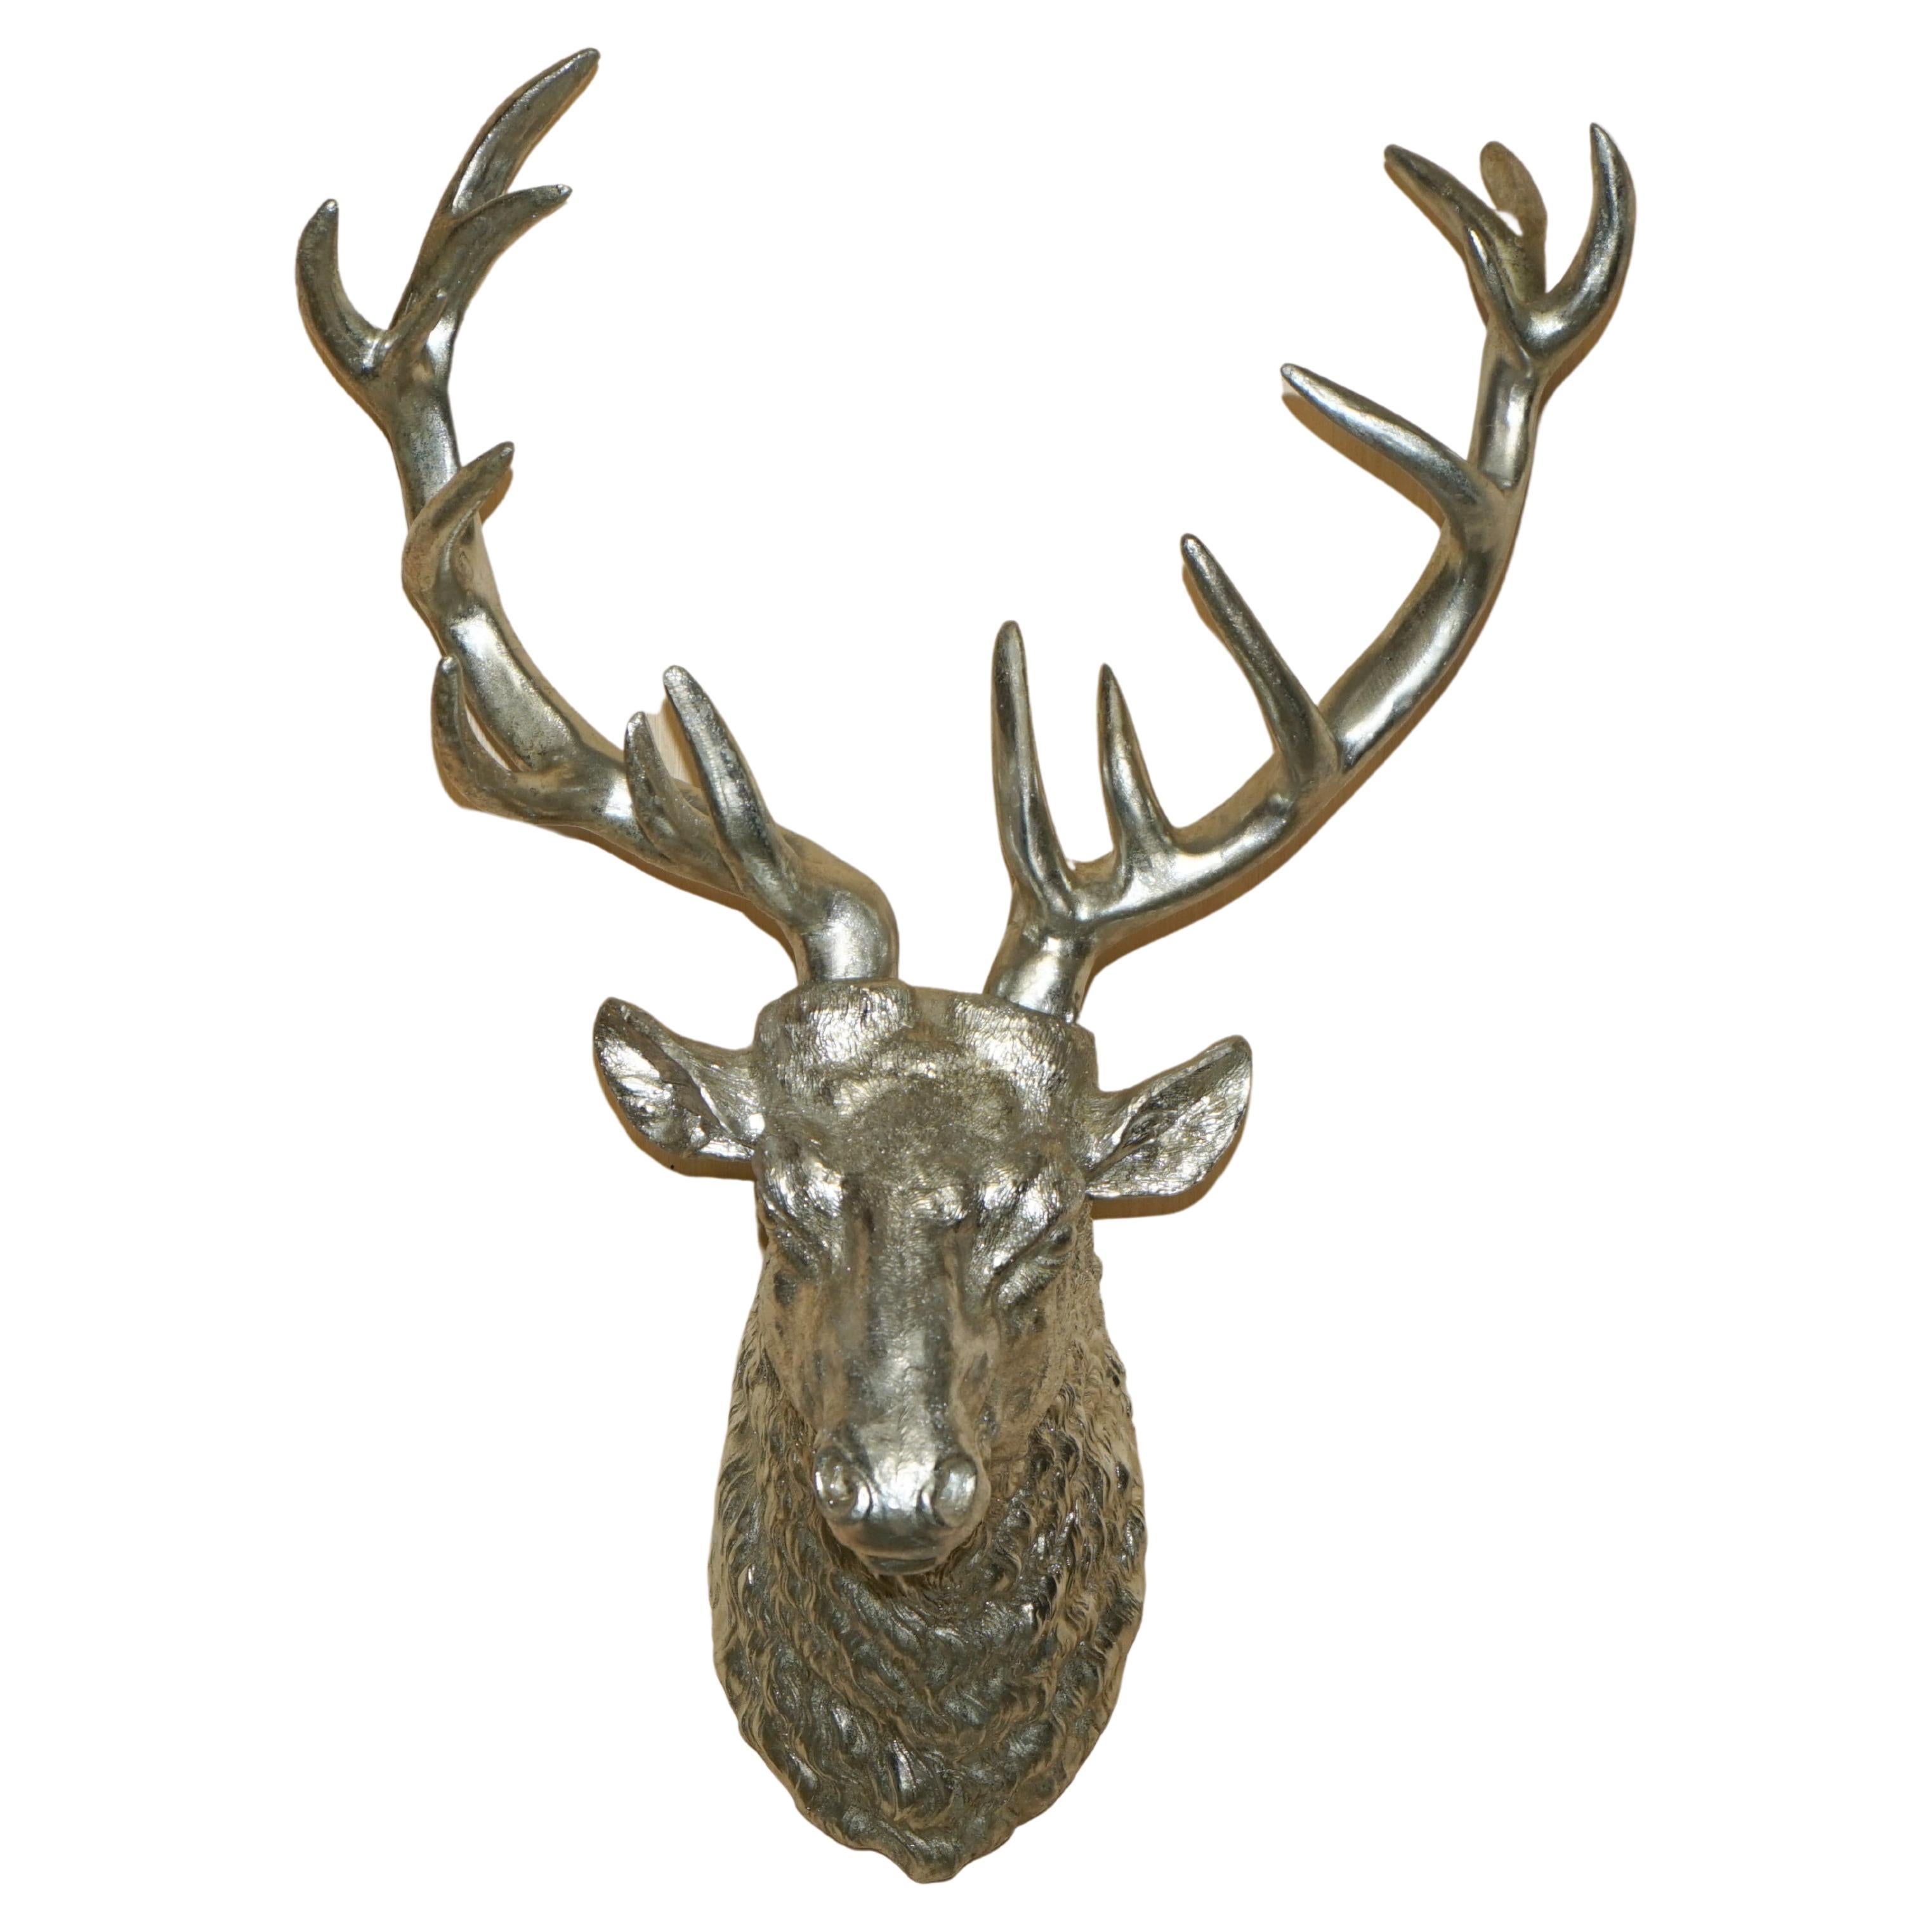 FULL SIZED SILVERED DEER STAG HEAD WiTH REMOVABLE ANTLERS DECORATIVE FOIL FINISH